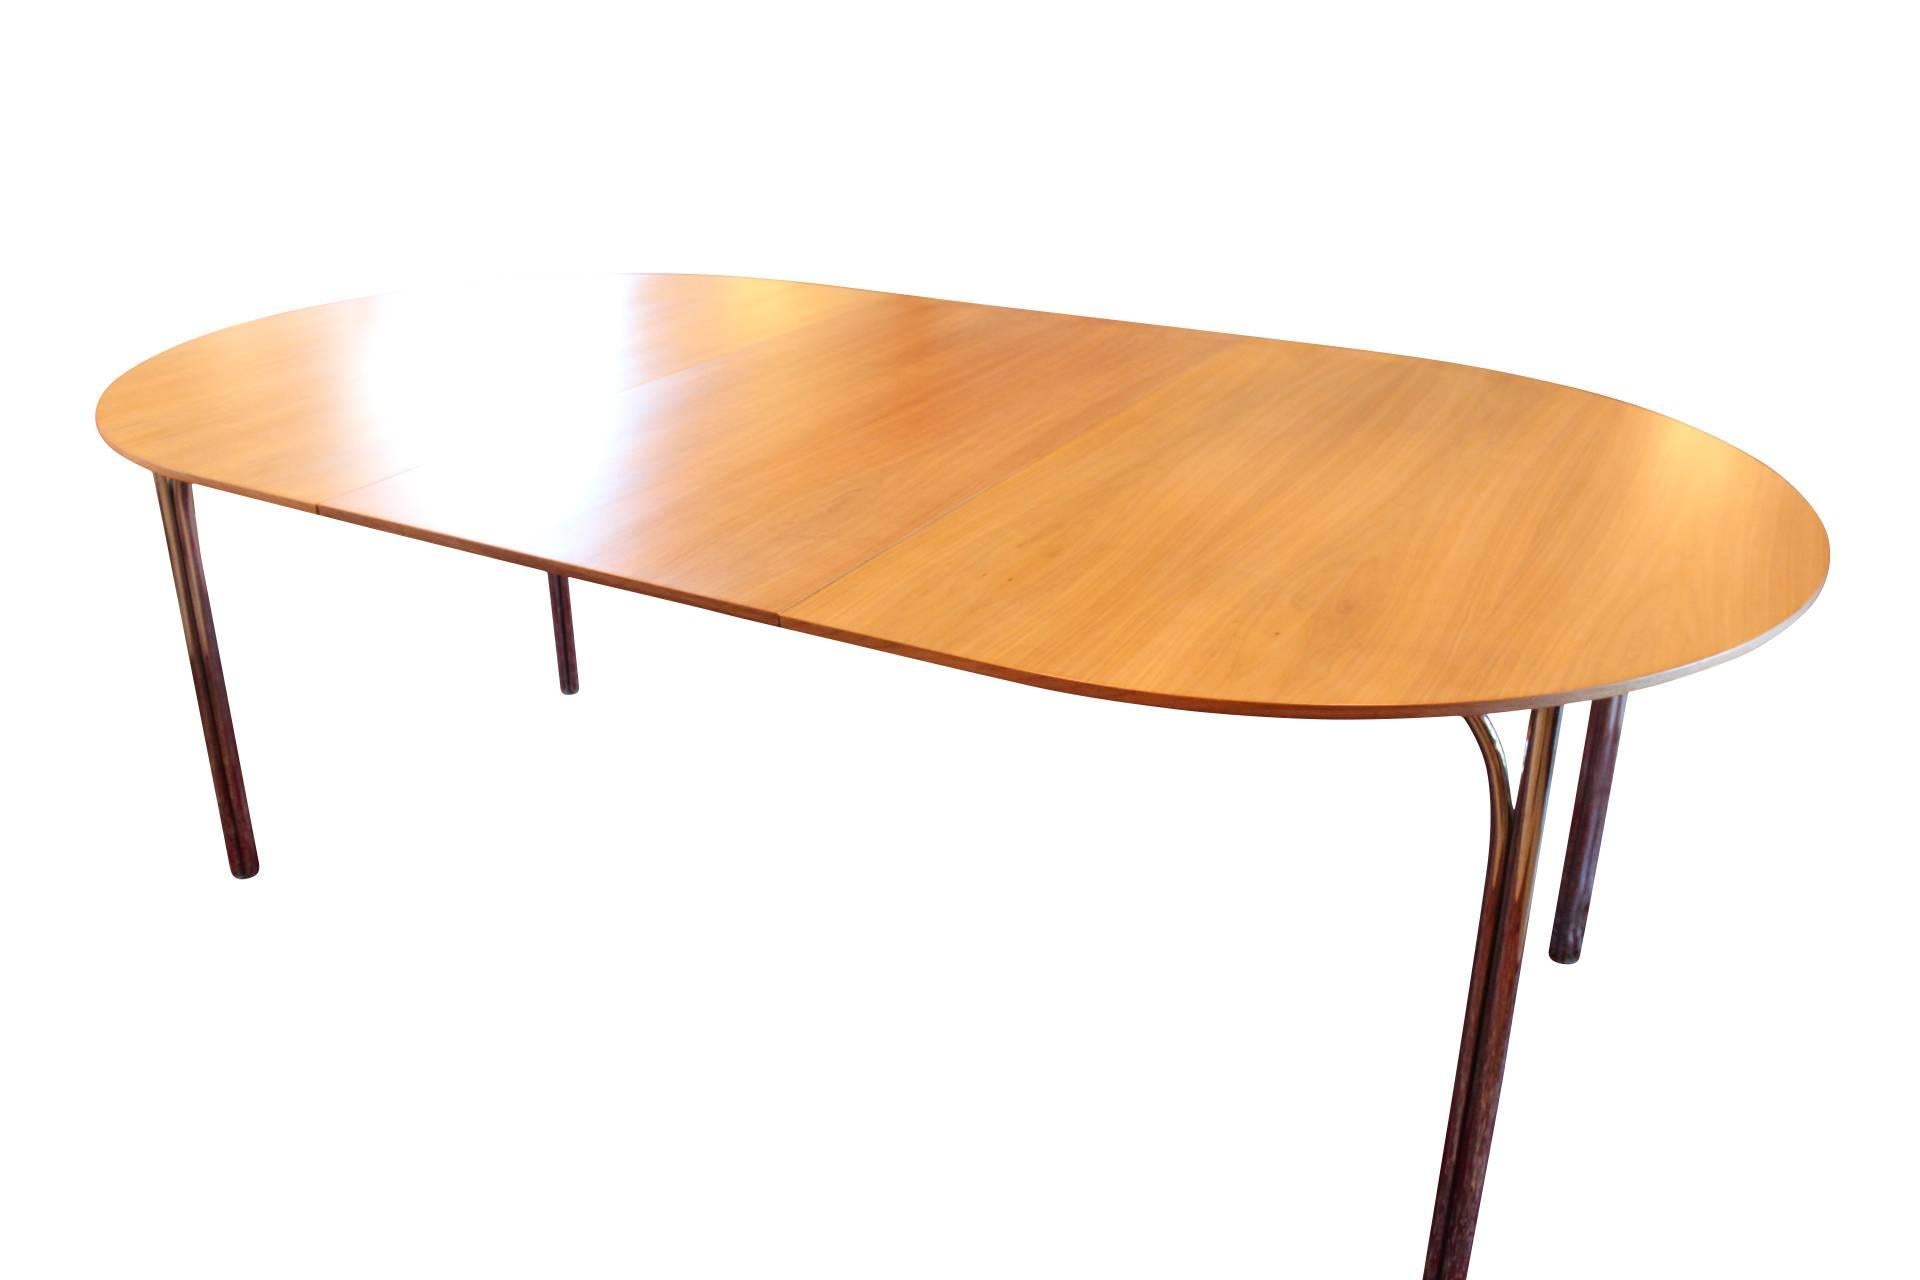 Danish Tobago Dining Table, Model 8311, by Nanna Ditzel and Fredericia Furniture, 1993